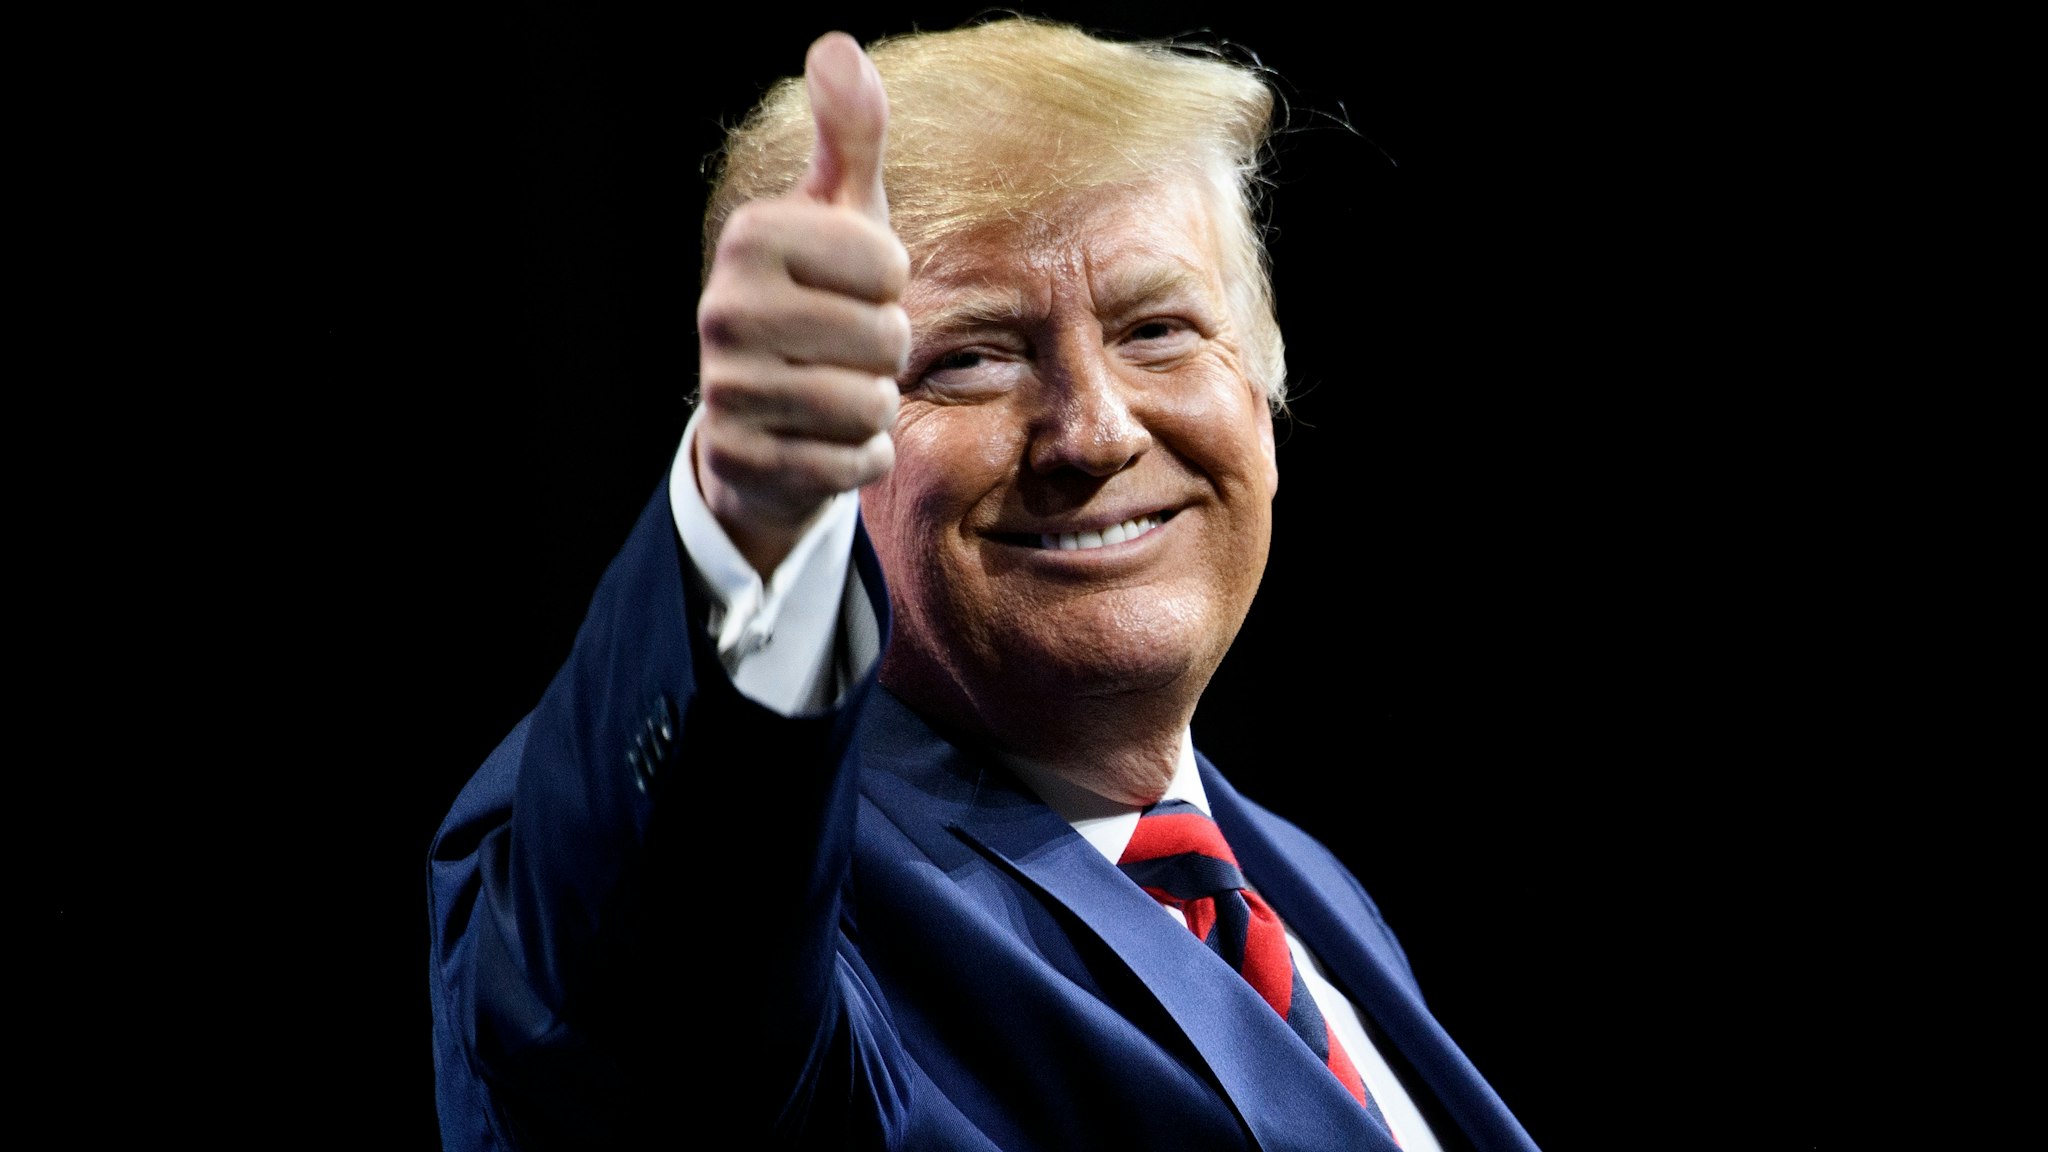 US President Donald Trump gestures during the International Association of Chiefs of Police Annual Conference and Exposition at the McCormick Place Convention Center October 28, 2019, in Chicago, Illinois.